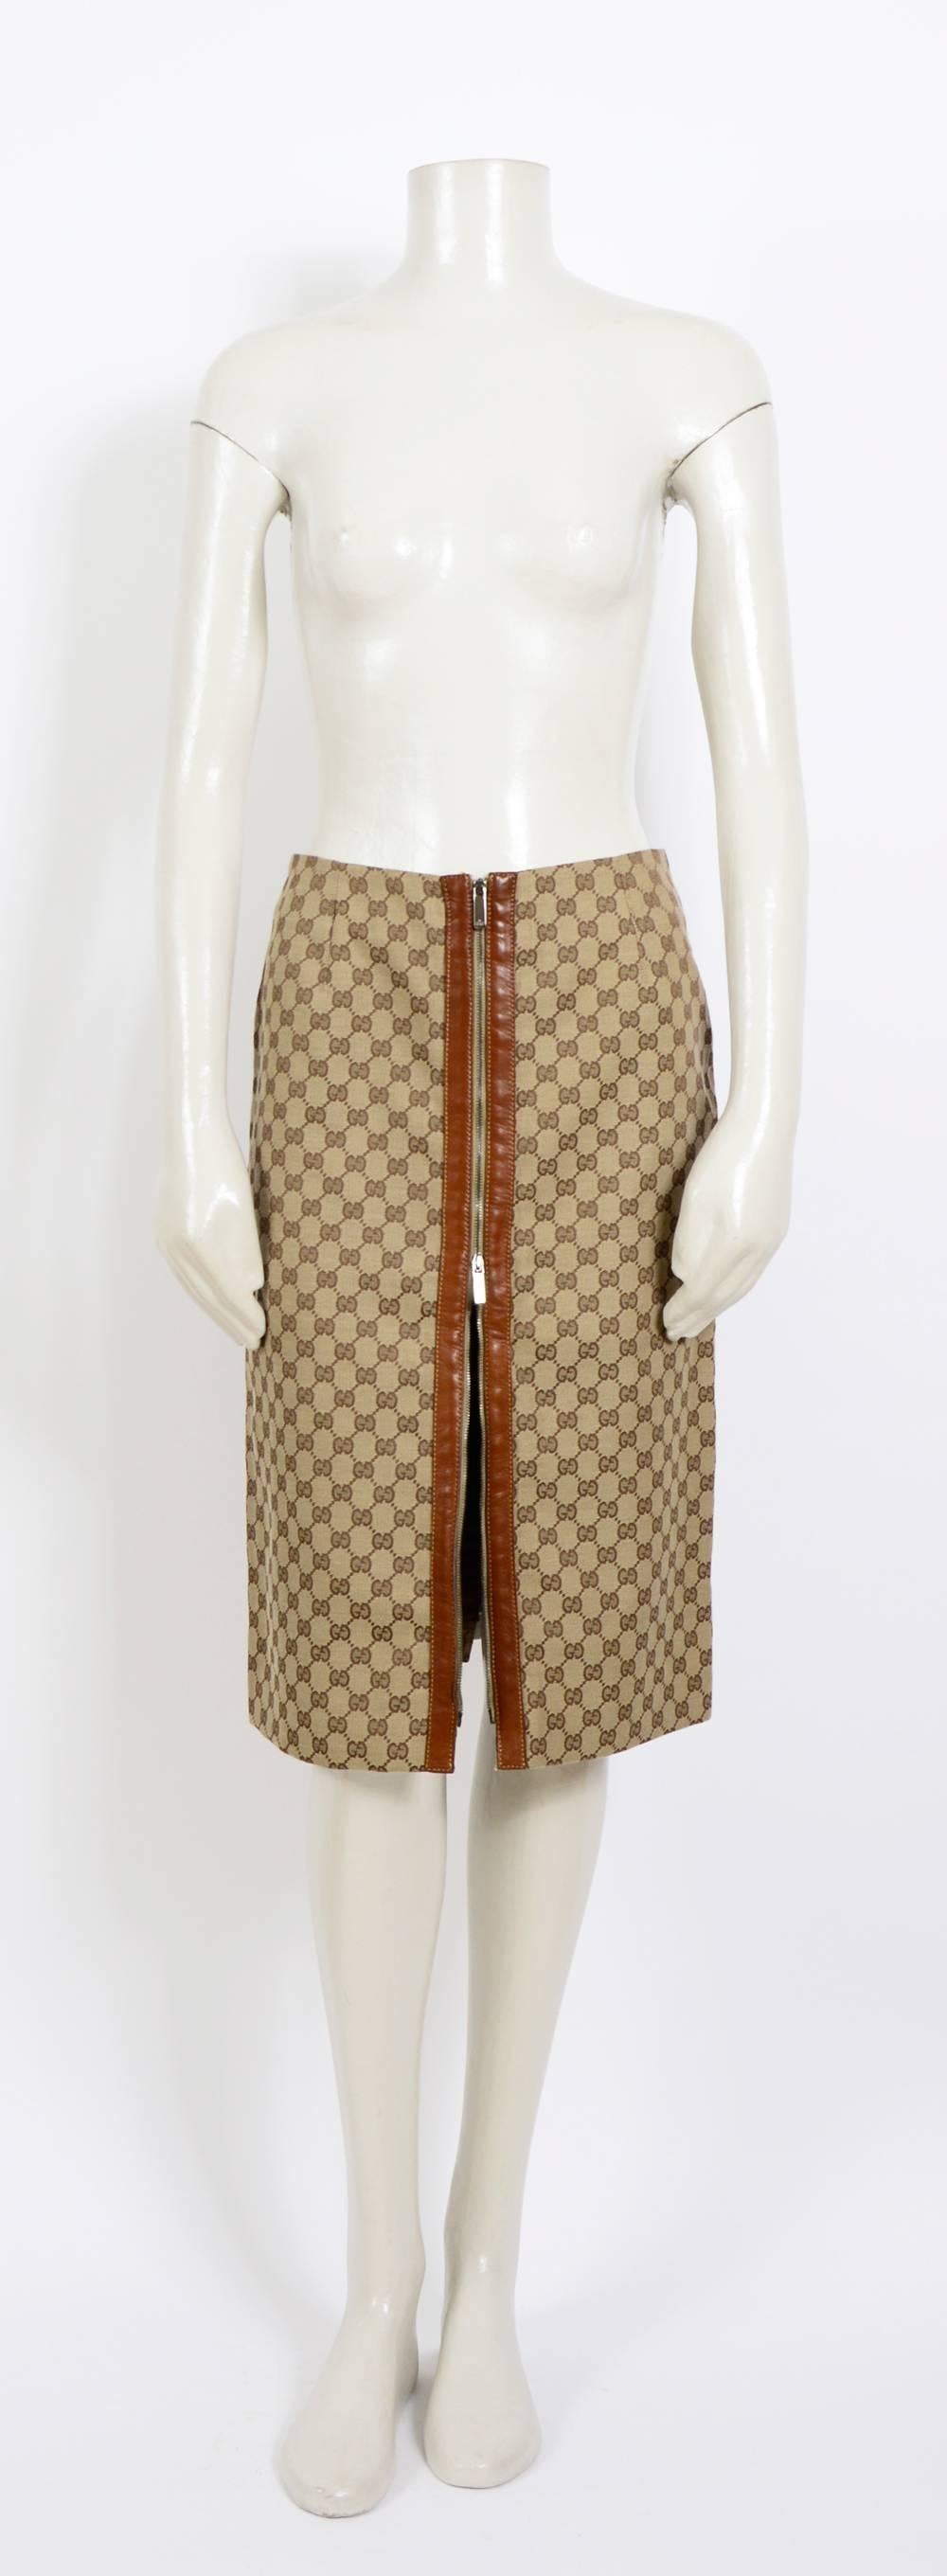 Gucci leather trim logo skirt with zipper detail by Tom Ford
Made in Italy - Size 38